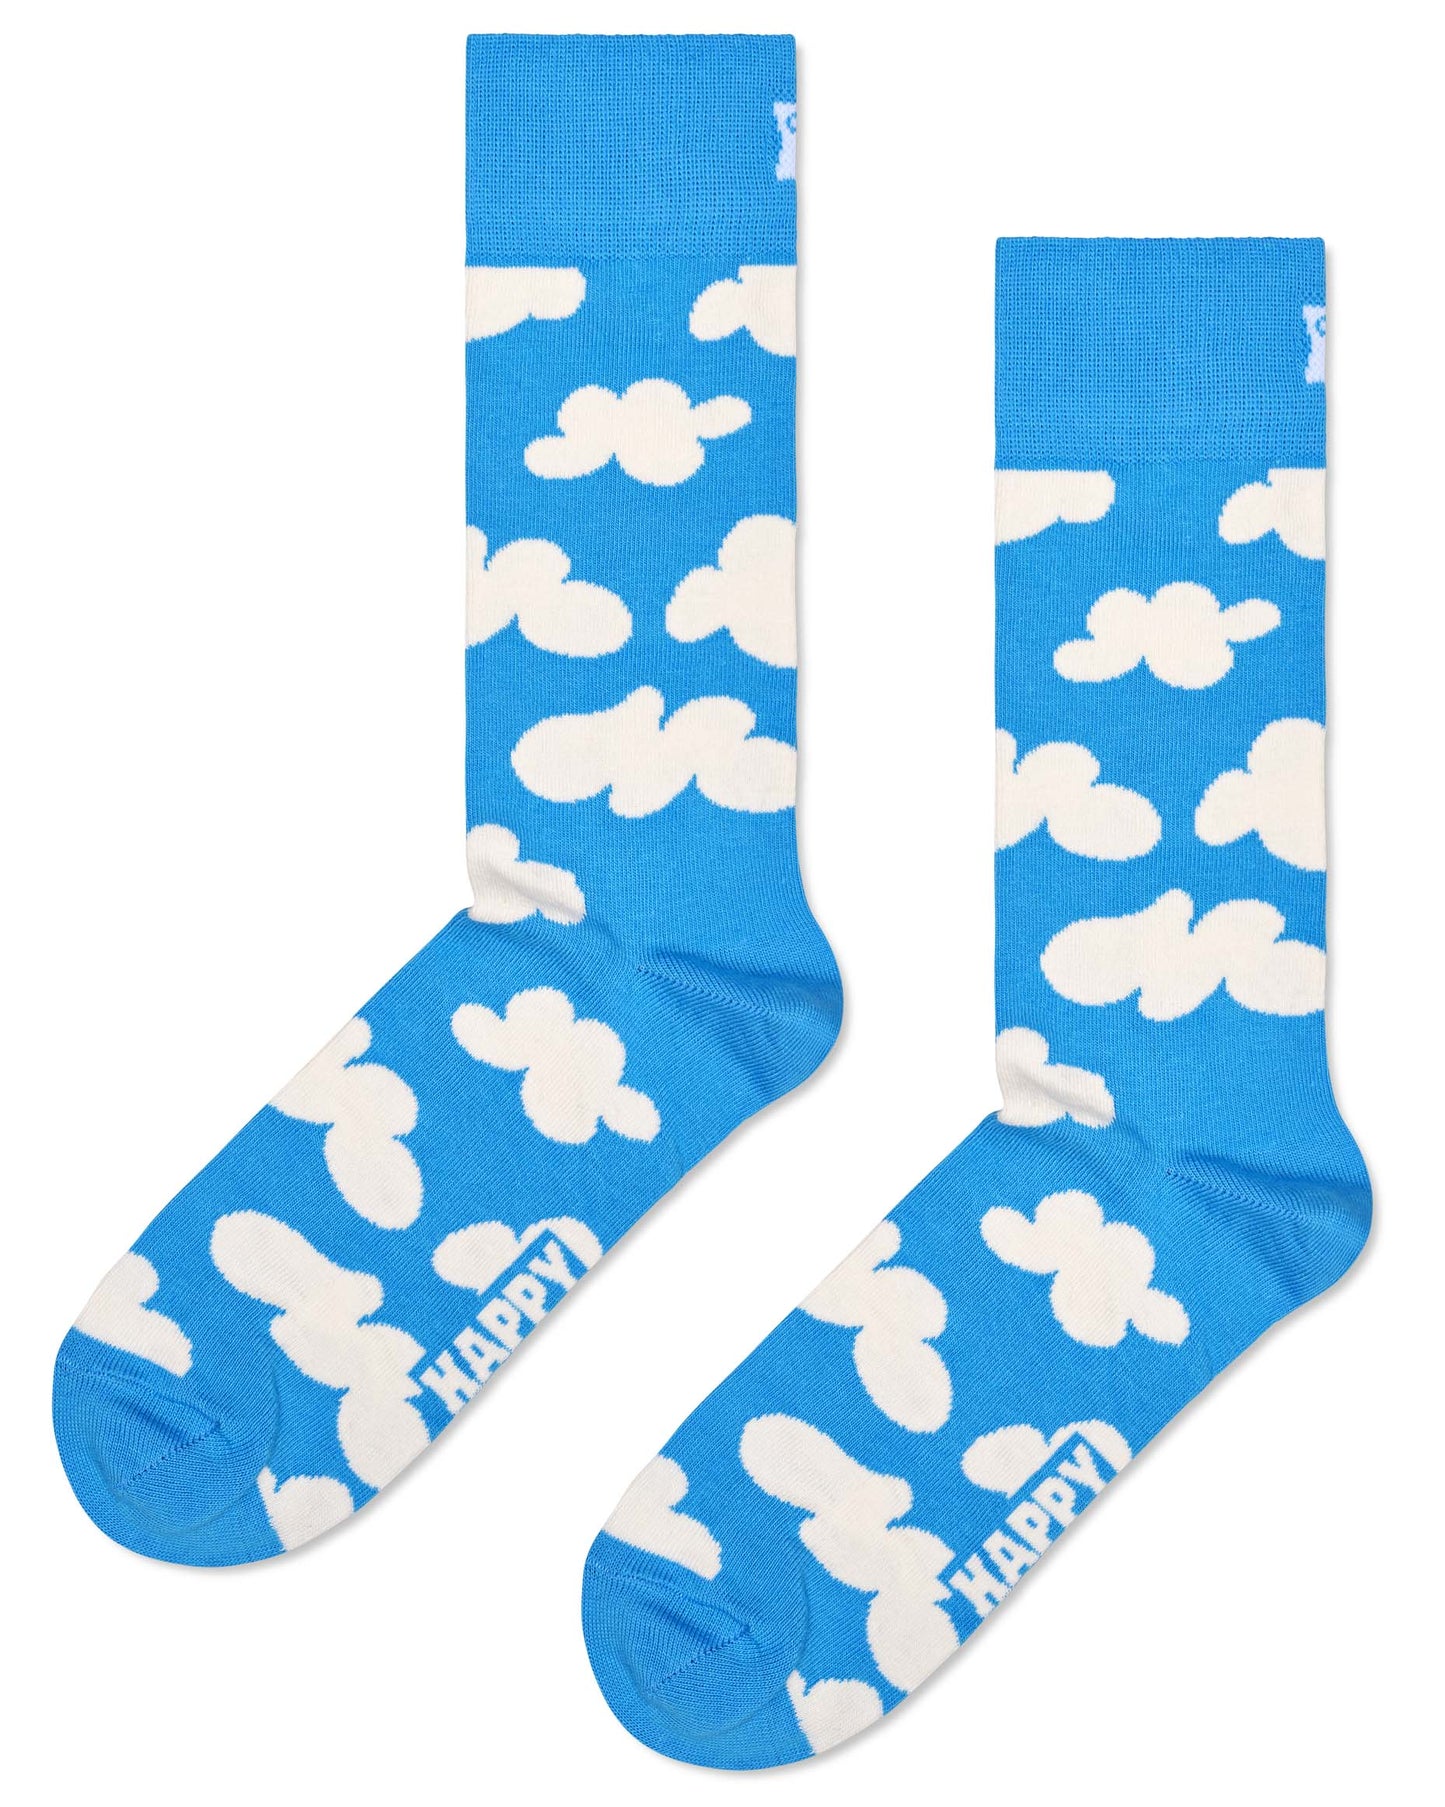 Happy Sock CLO01-6700 Cloudy Sock - New sky blue cotton crew length ankle socks with off white fluffy cumulus clouds pattern. Available in men and women's sizes.